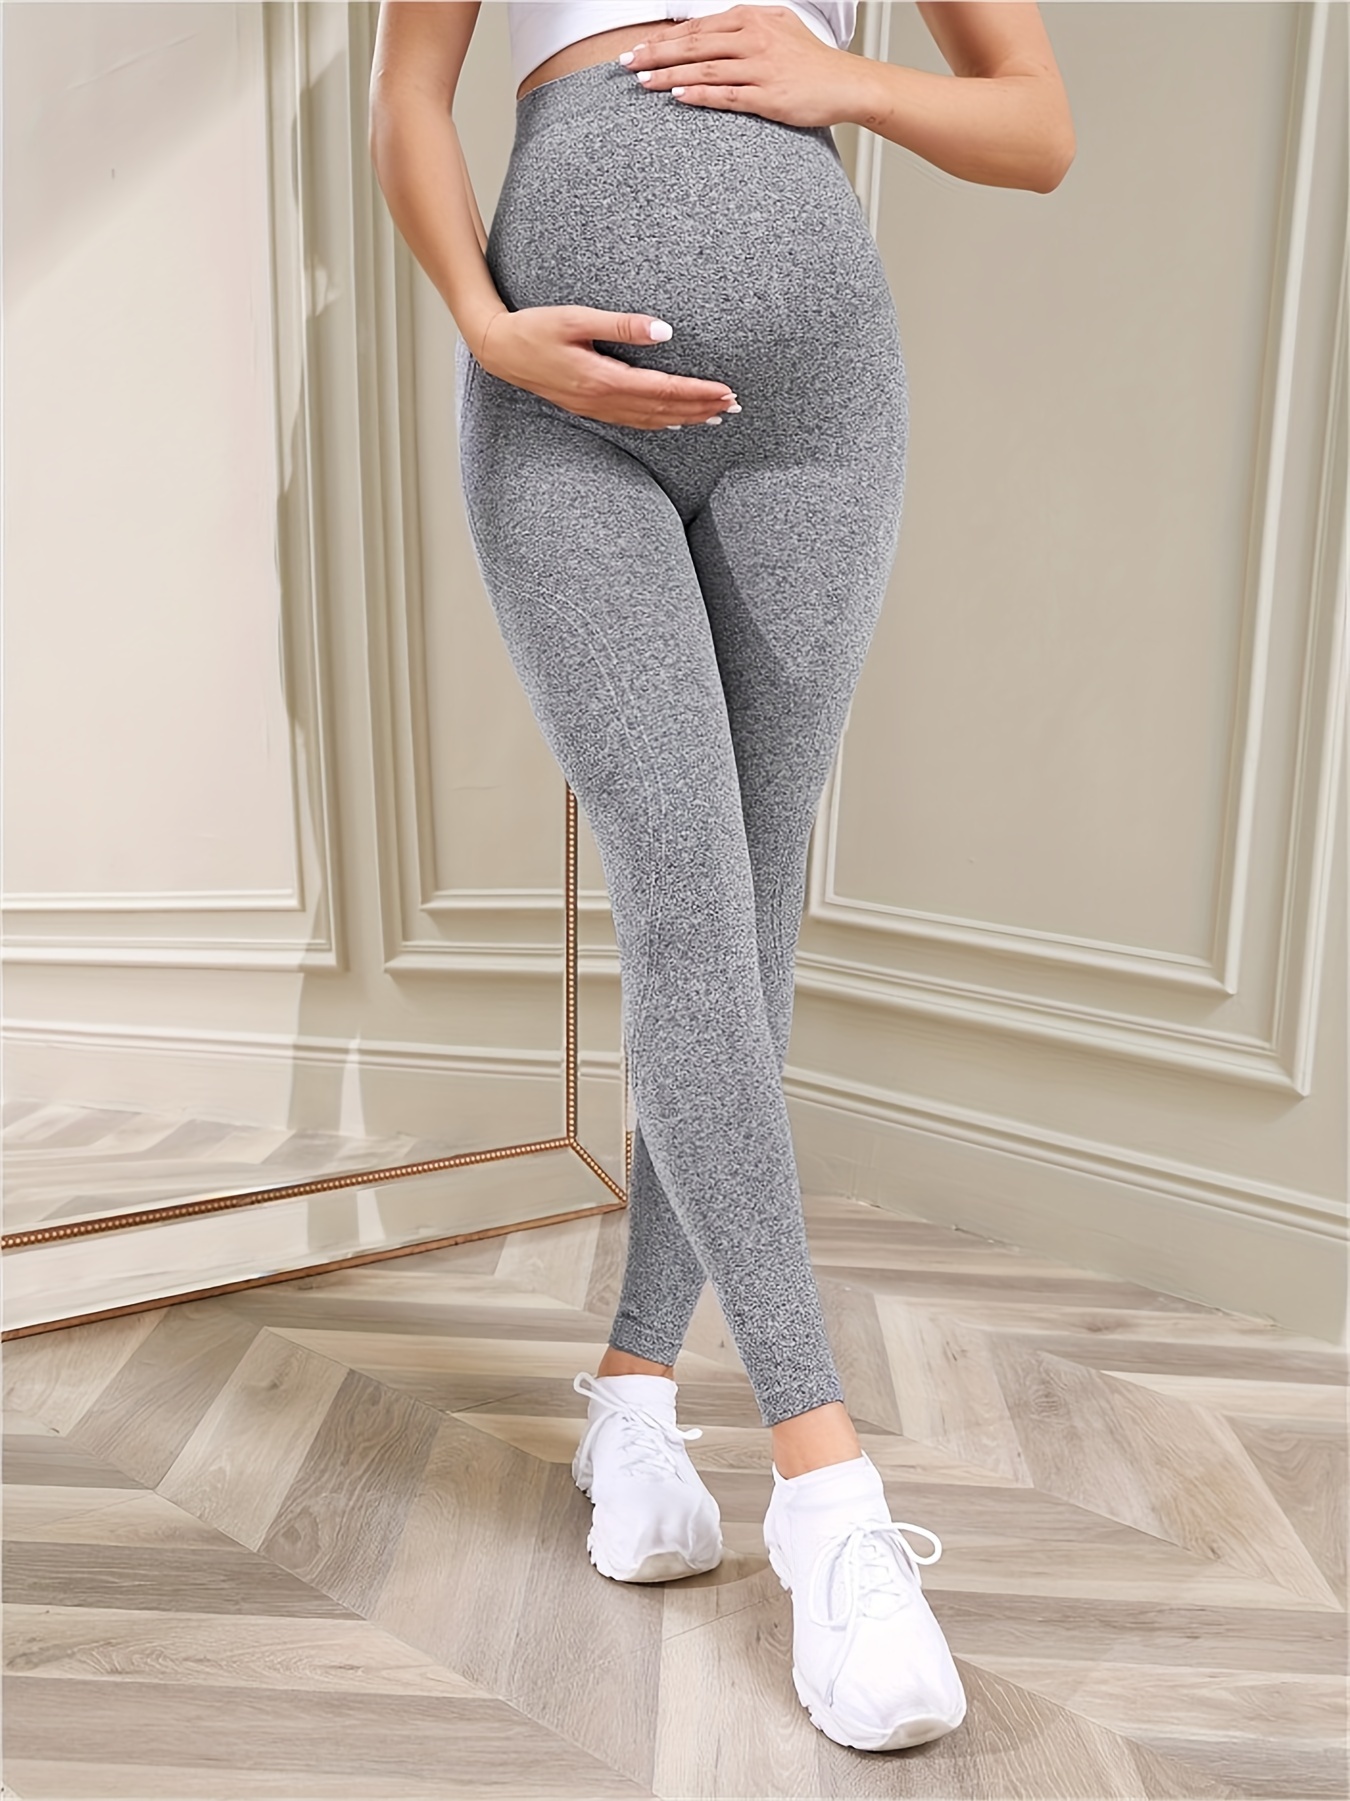 skpabo Maternity Tights Winter Thermal Maternity Leggings Thermal Lined  Maternity Trousers Cotton Maternity Leggings Long Thermal Leggings for  Pregnant Women Trousers Soft Opaque Pregnancy Leggings 